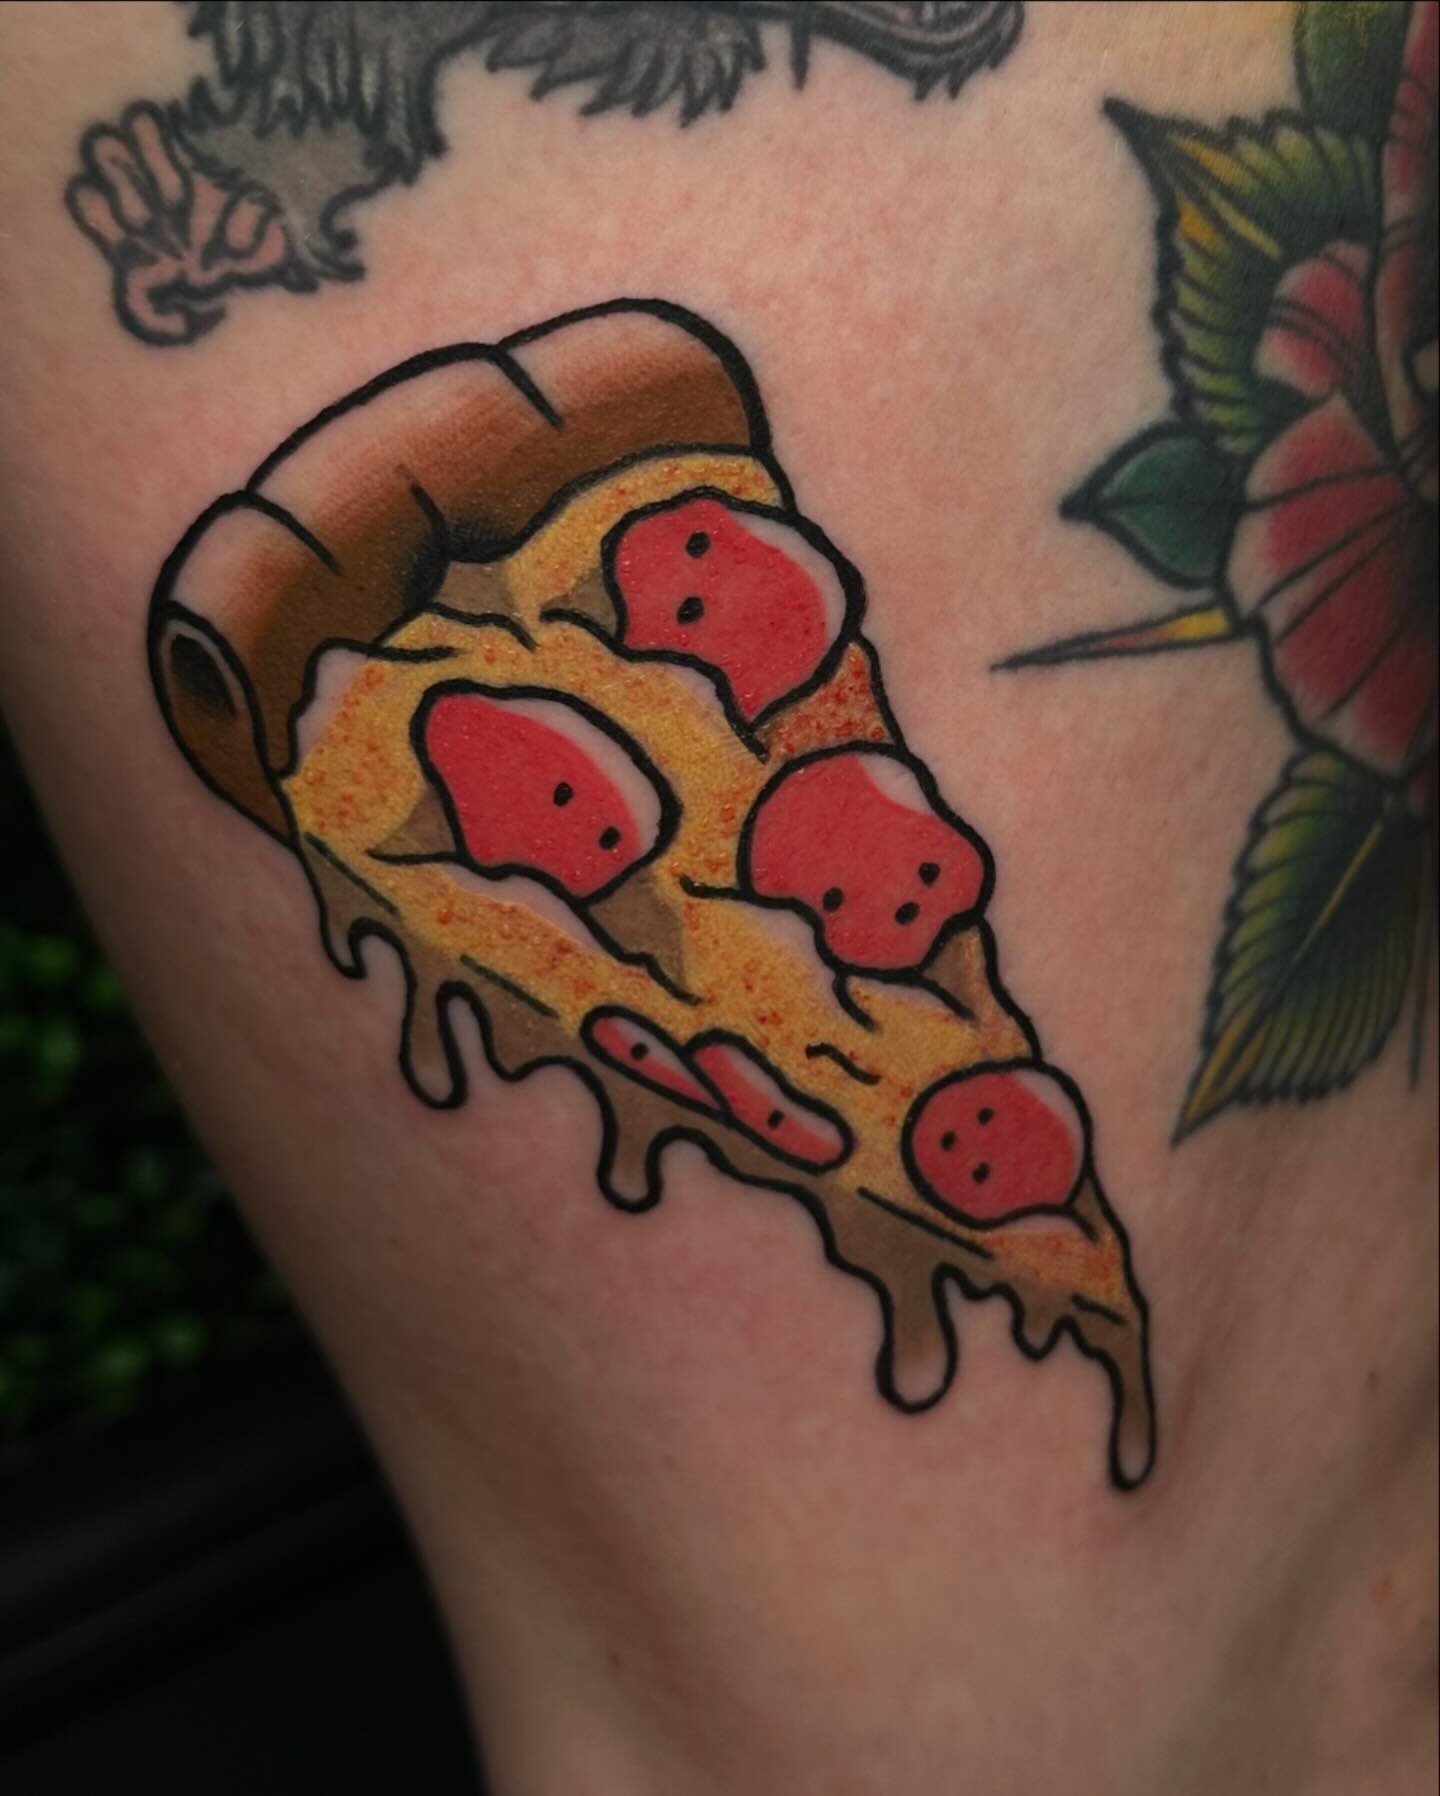 Two cool matching slices for two cool dudes. Shout out to @rebekahdaniel and @______livy for letting me do these and for hanging out! 

If you&rsquo;re wanting some cool stuff please send me a DM or click the link in my bio! 

#tattoo #tattoos #pizza